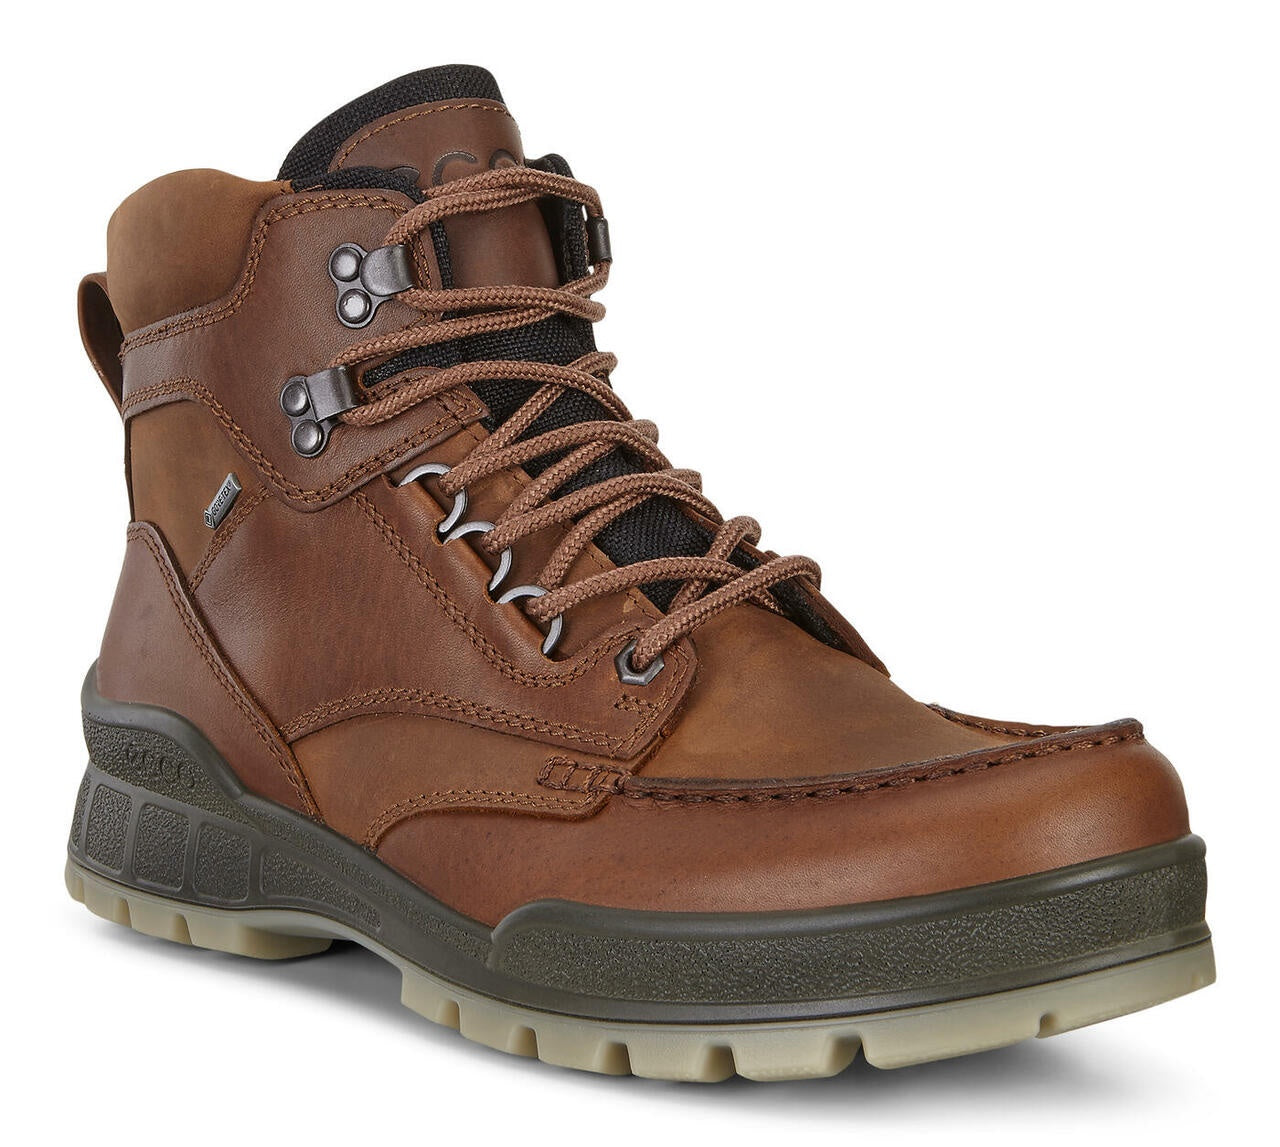 Ecco Track 25 High Leather Boot in Bison/Bison